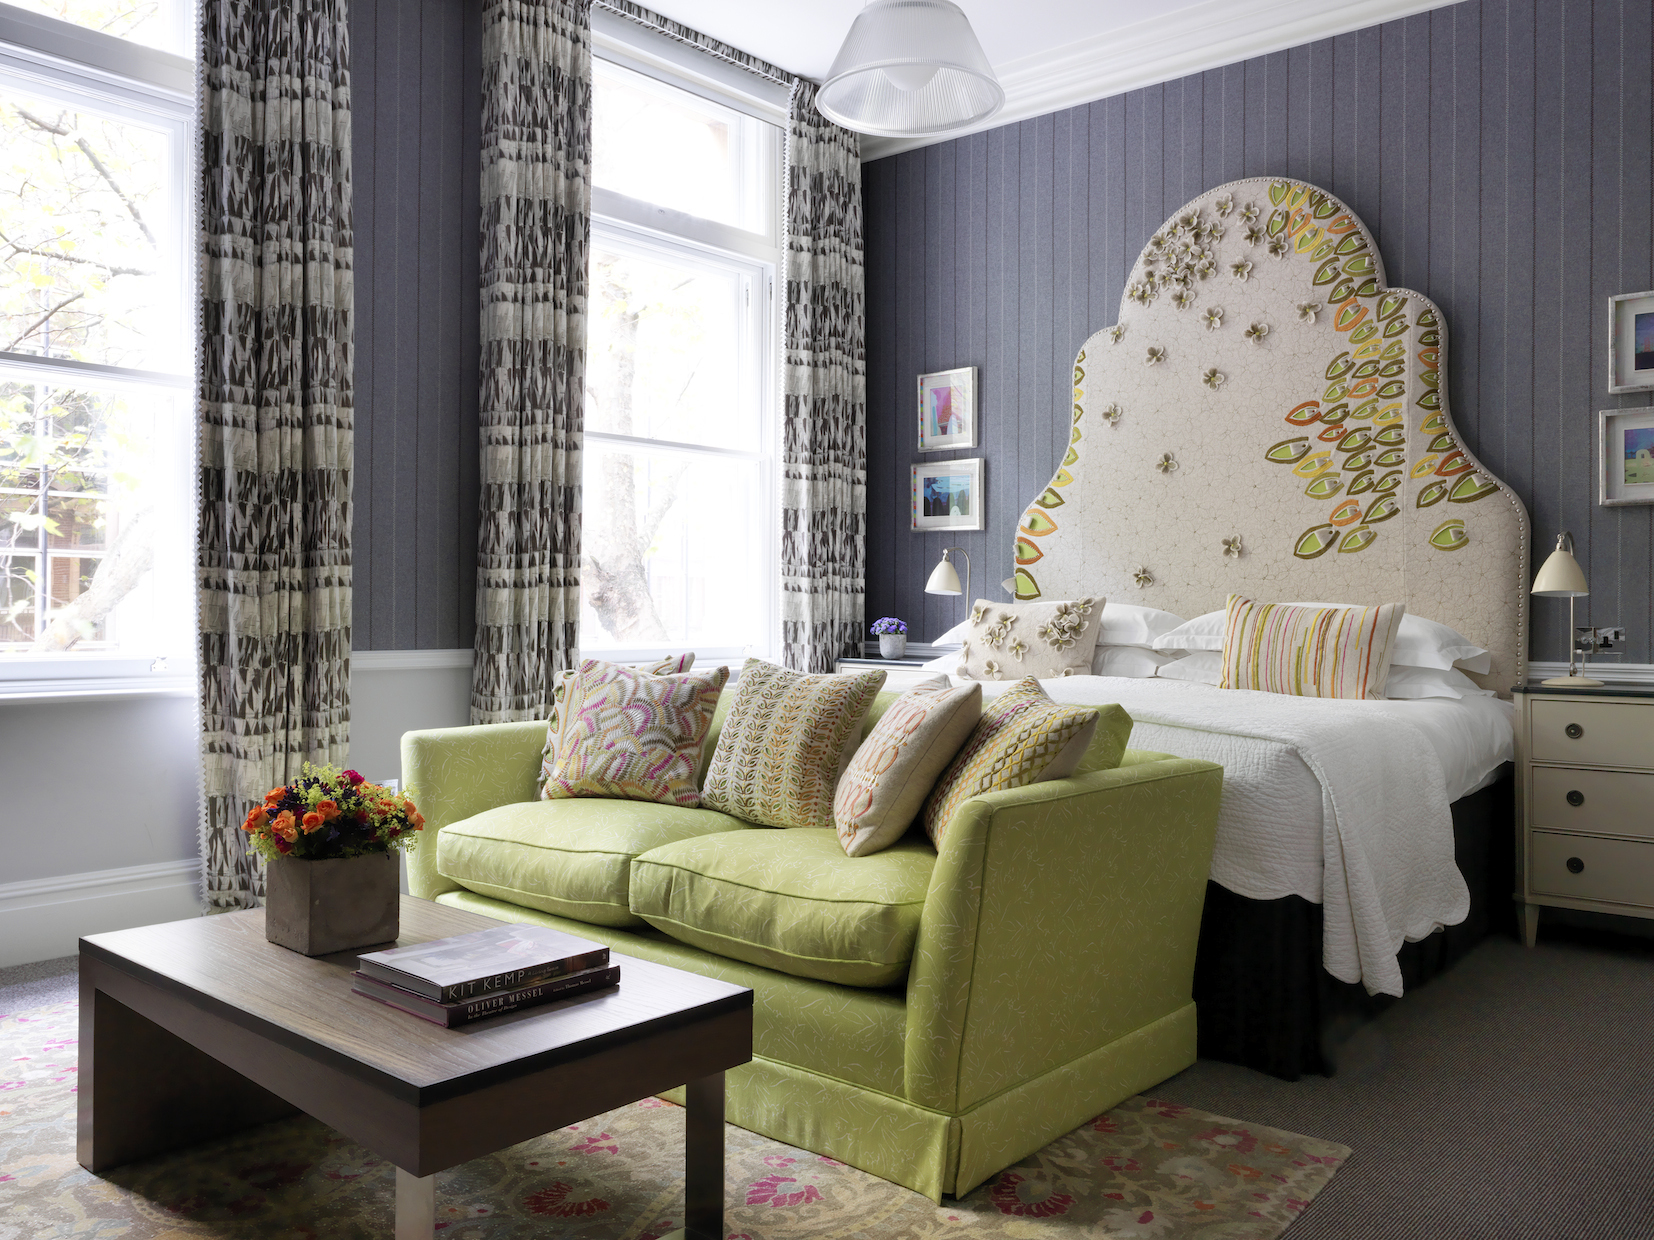 The Best Hotels In London 100 Hotels You Have To See